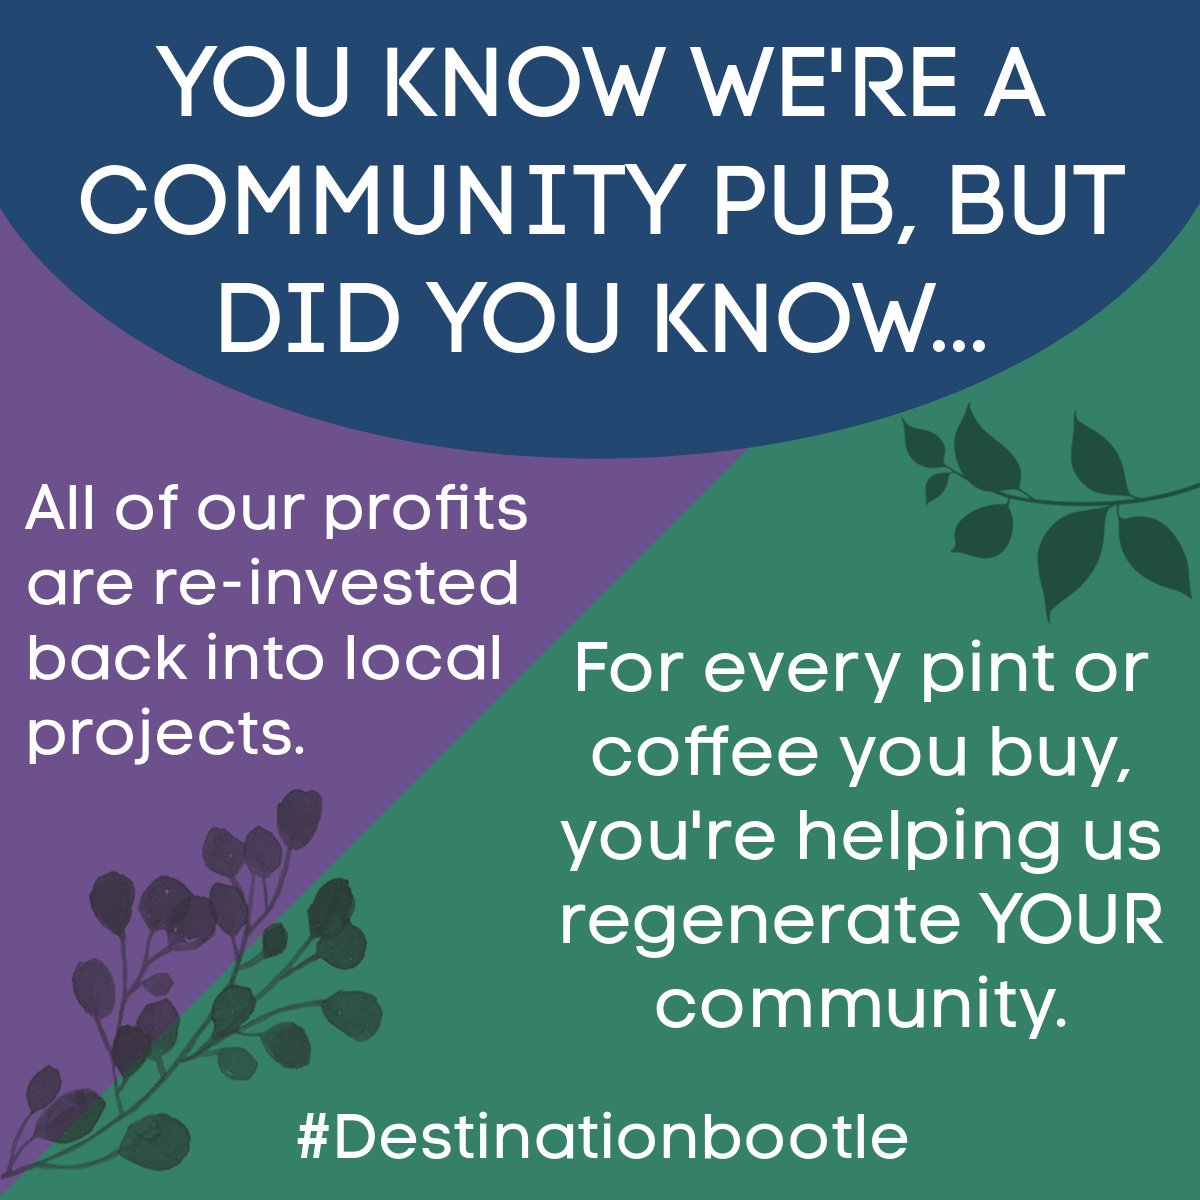 You know we're a community pub, but did you know all of our profits are reinvested into community projects?!🙌 🙏
#lockandquaybootle #destinationbootle
@SafeBrian @SafeRegen @janeatsaferegen